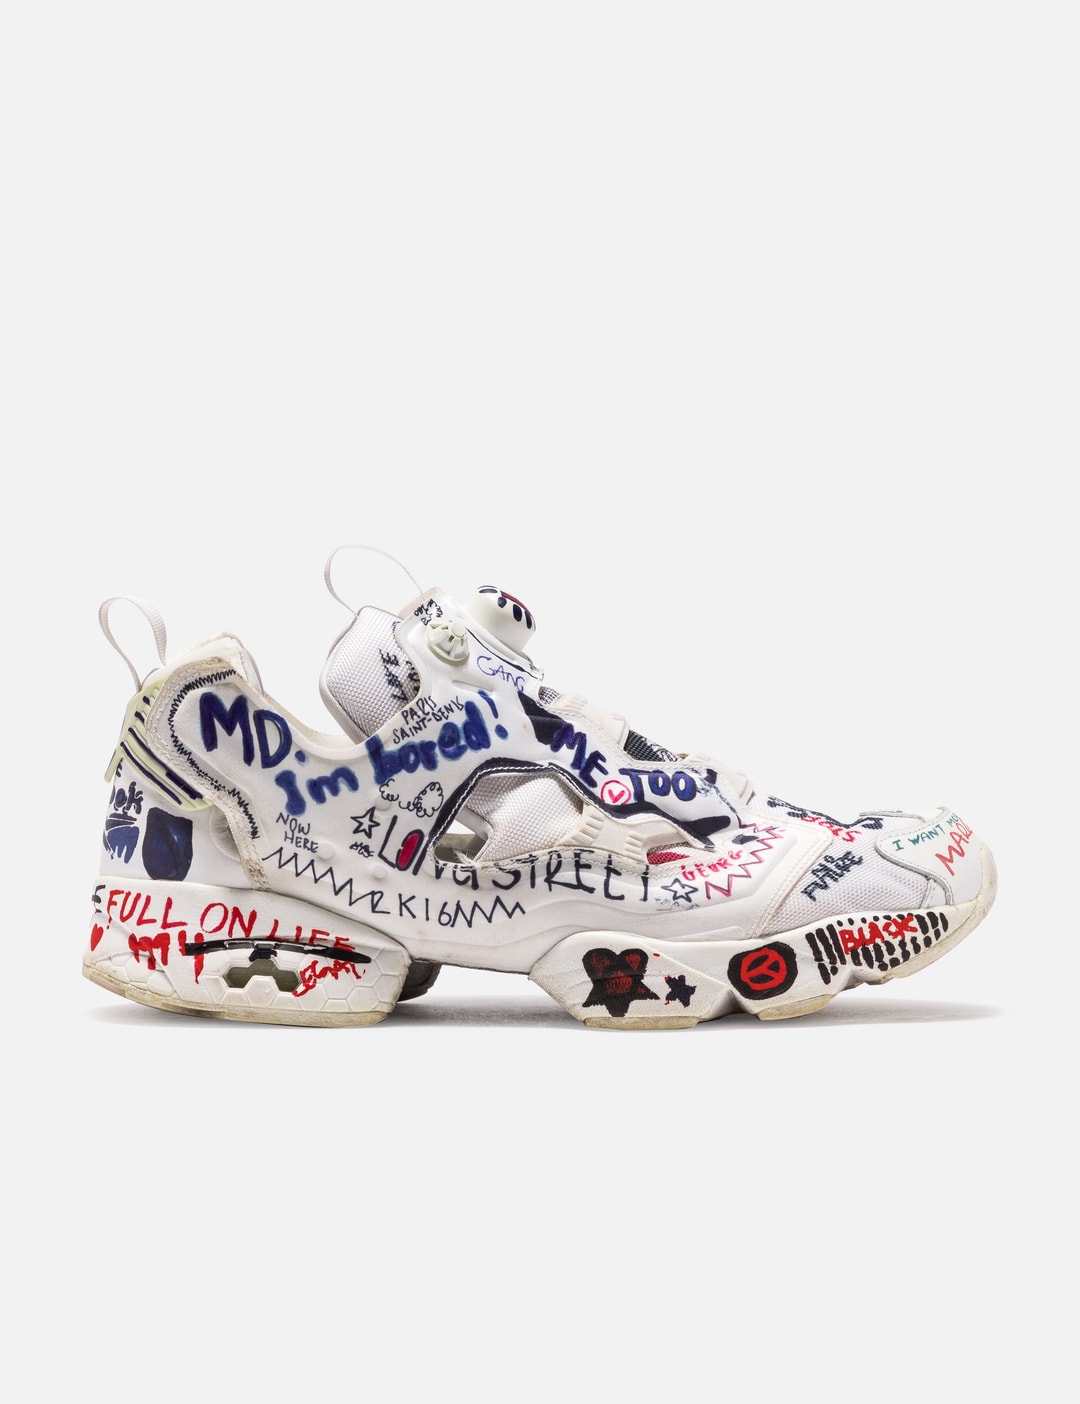 skraber Dynamics Bugsering Reebok - Reebok x Vetements Instapump Fury | HBX - Globally Curated Fashion  and Lifestyle by Hypebeast